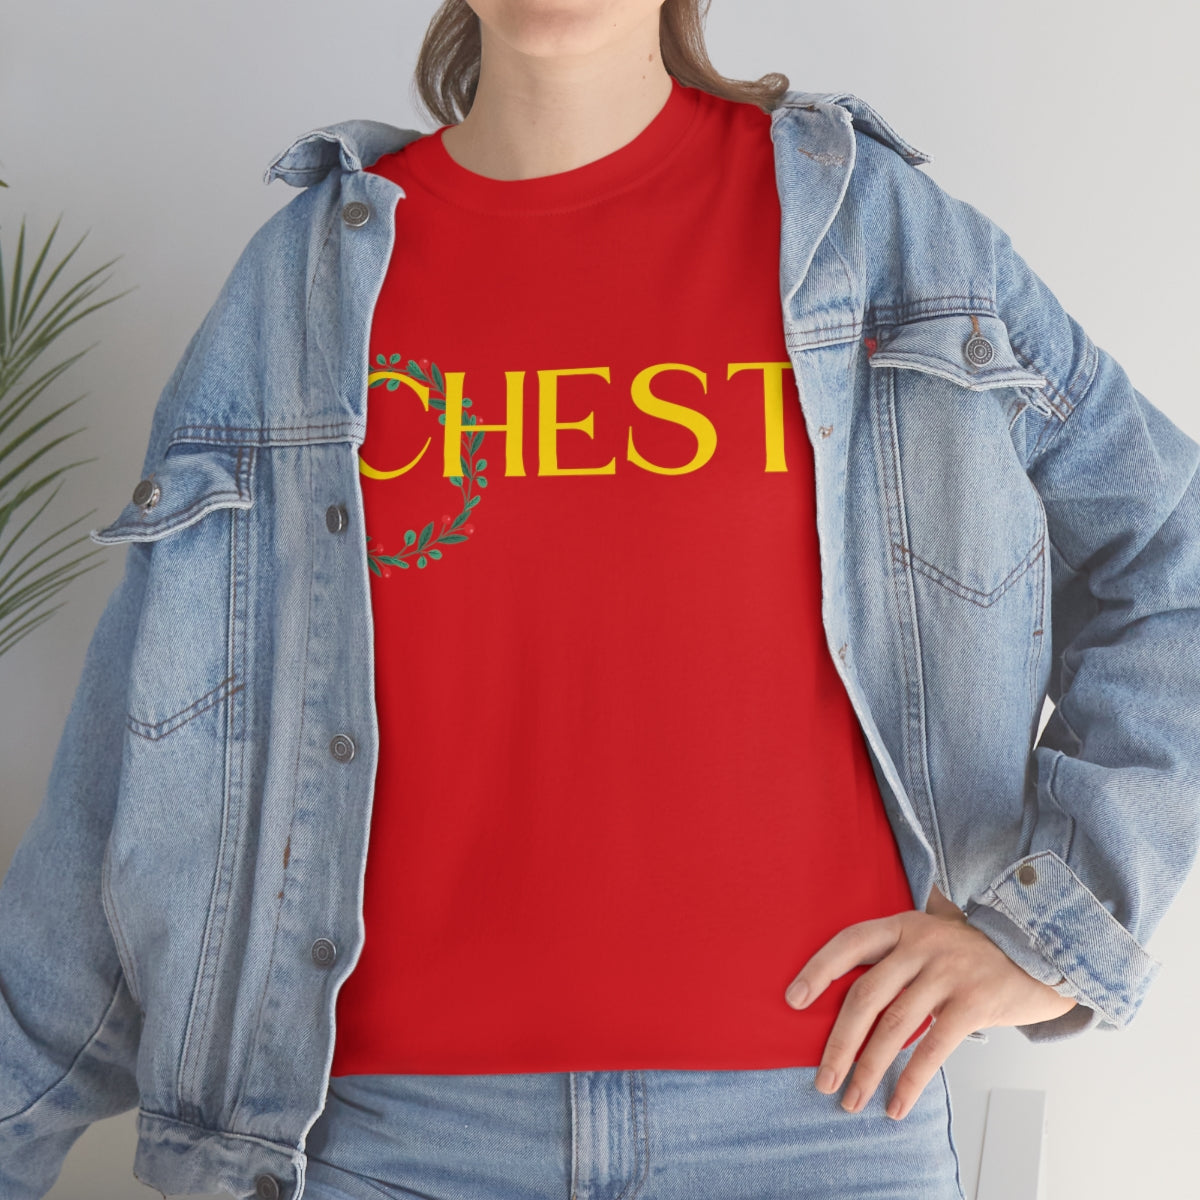 Couples Tees - CHEST NUTS